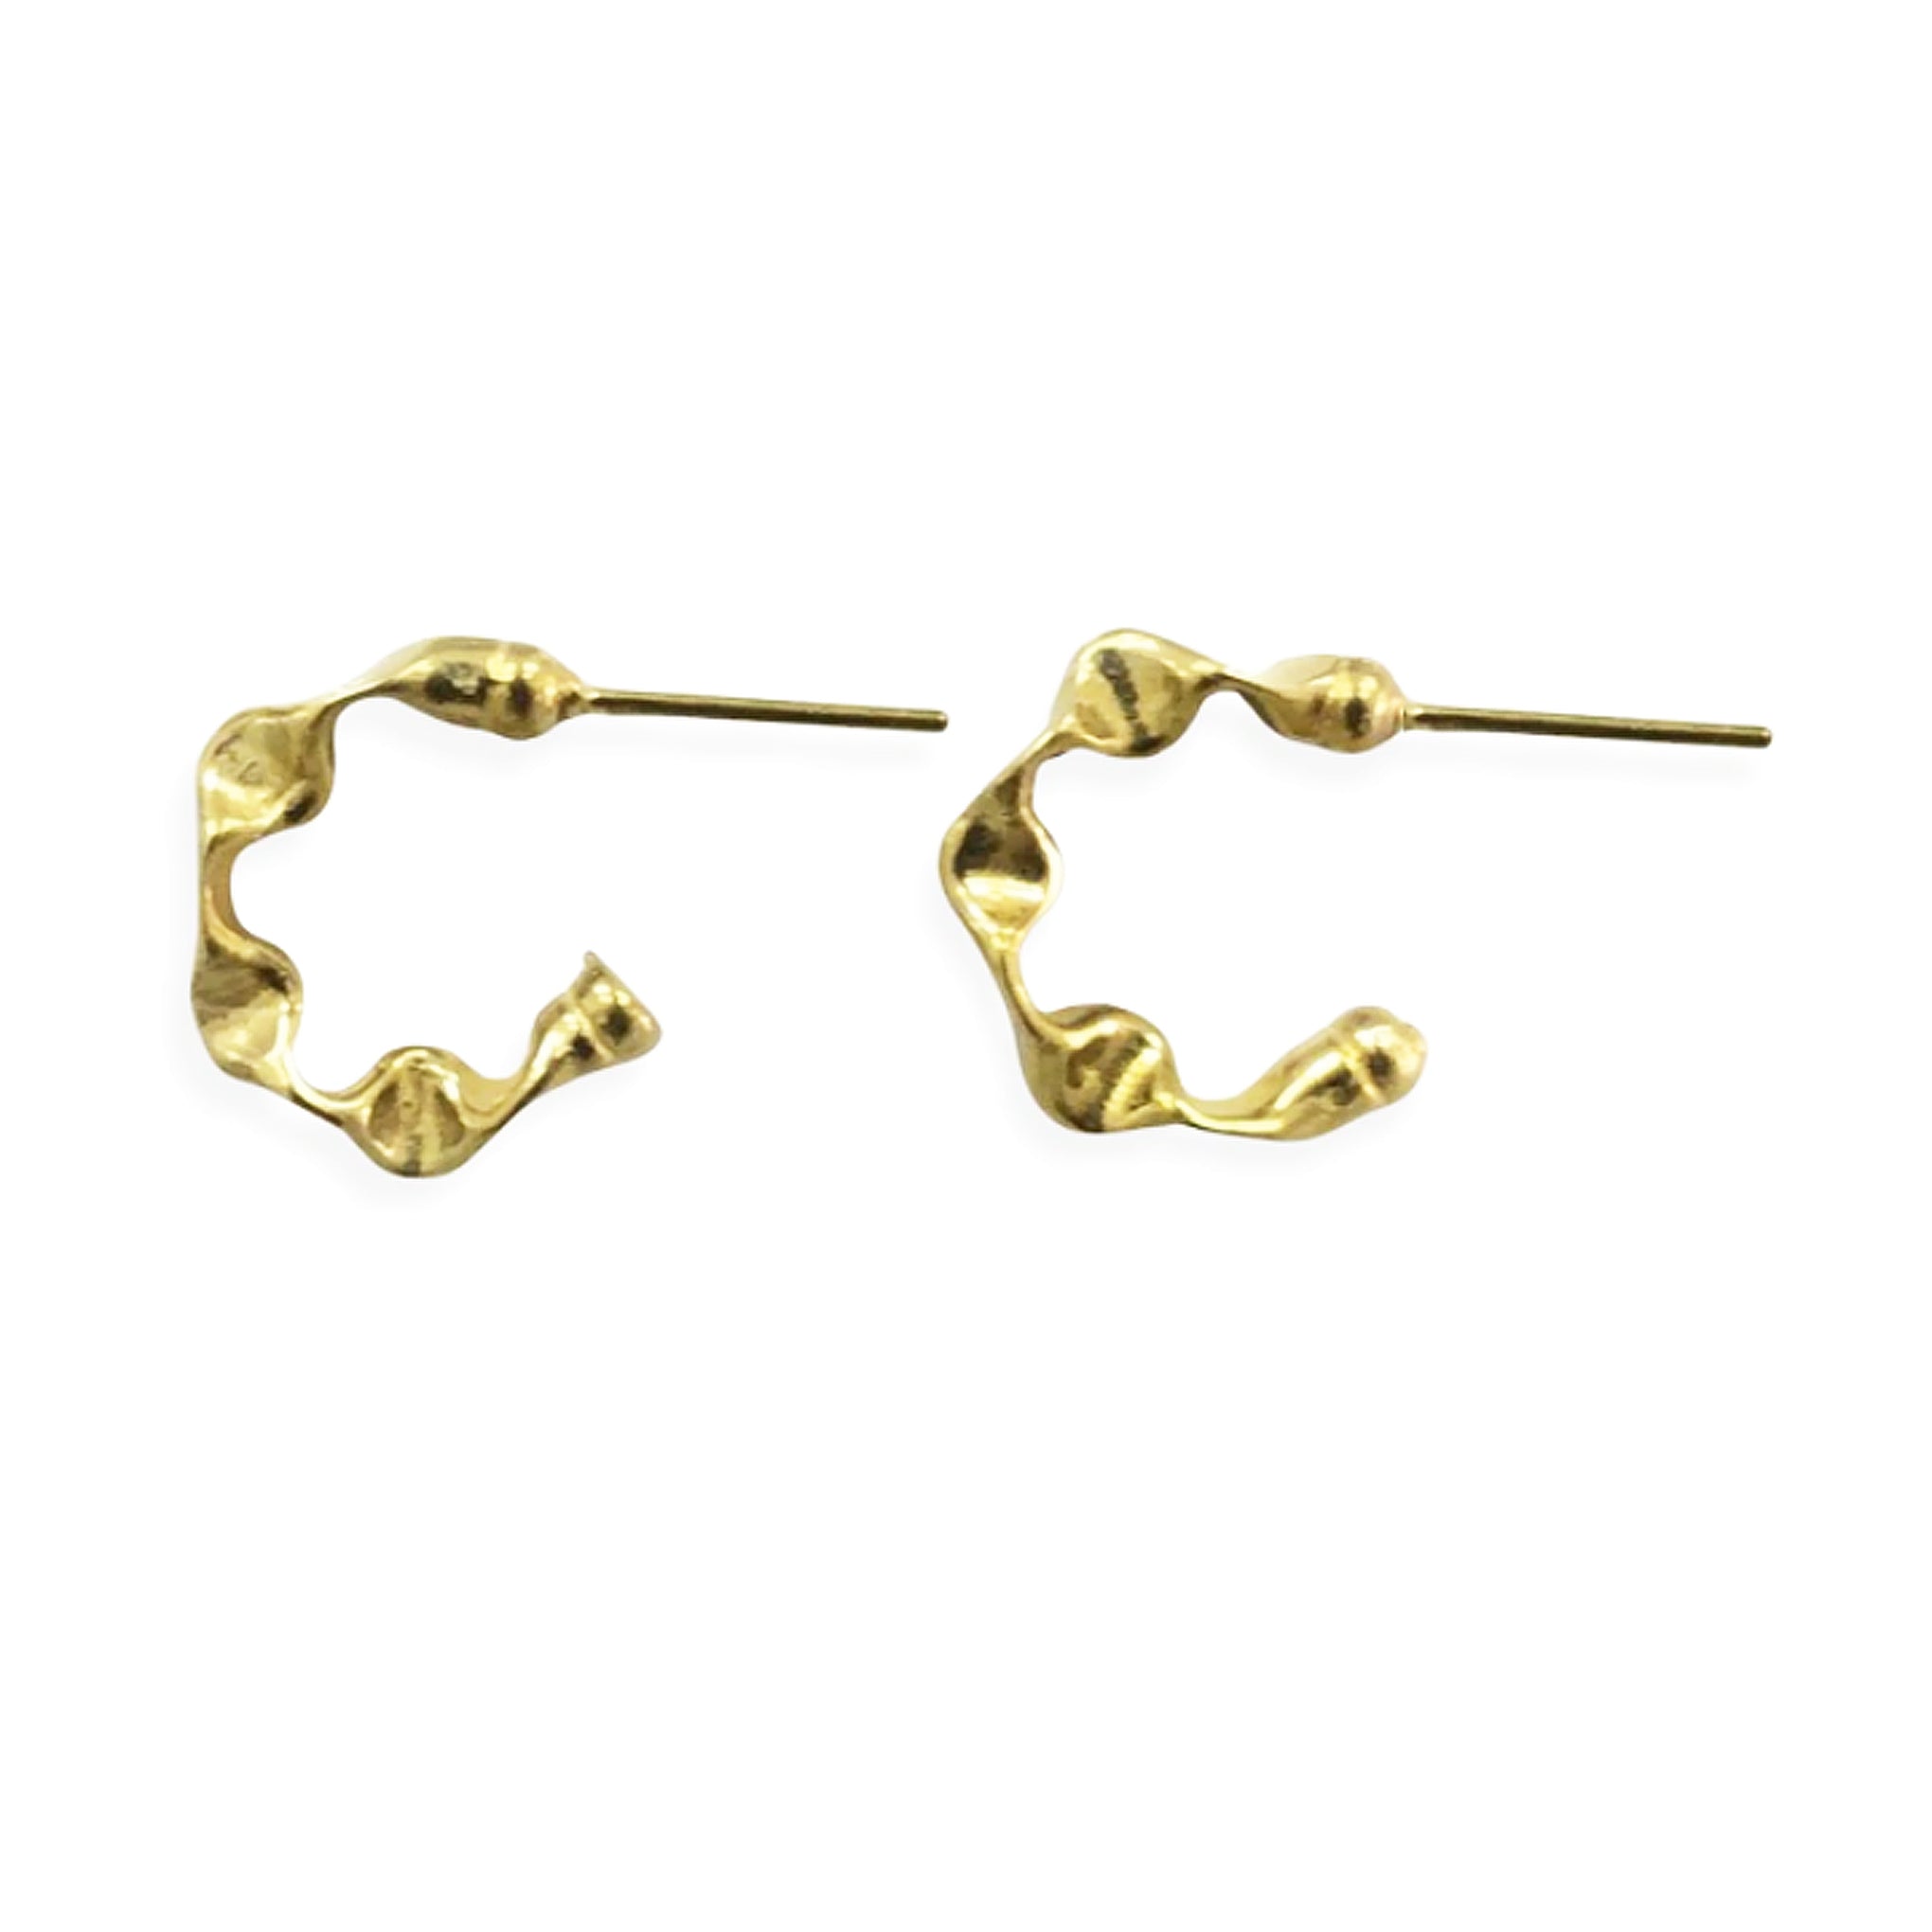 Sheila Fajl Small Wrinkled Hoop Earrings in Polished Gold Plated